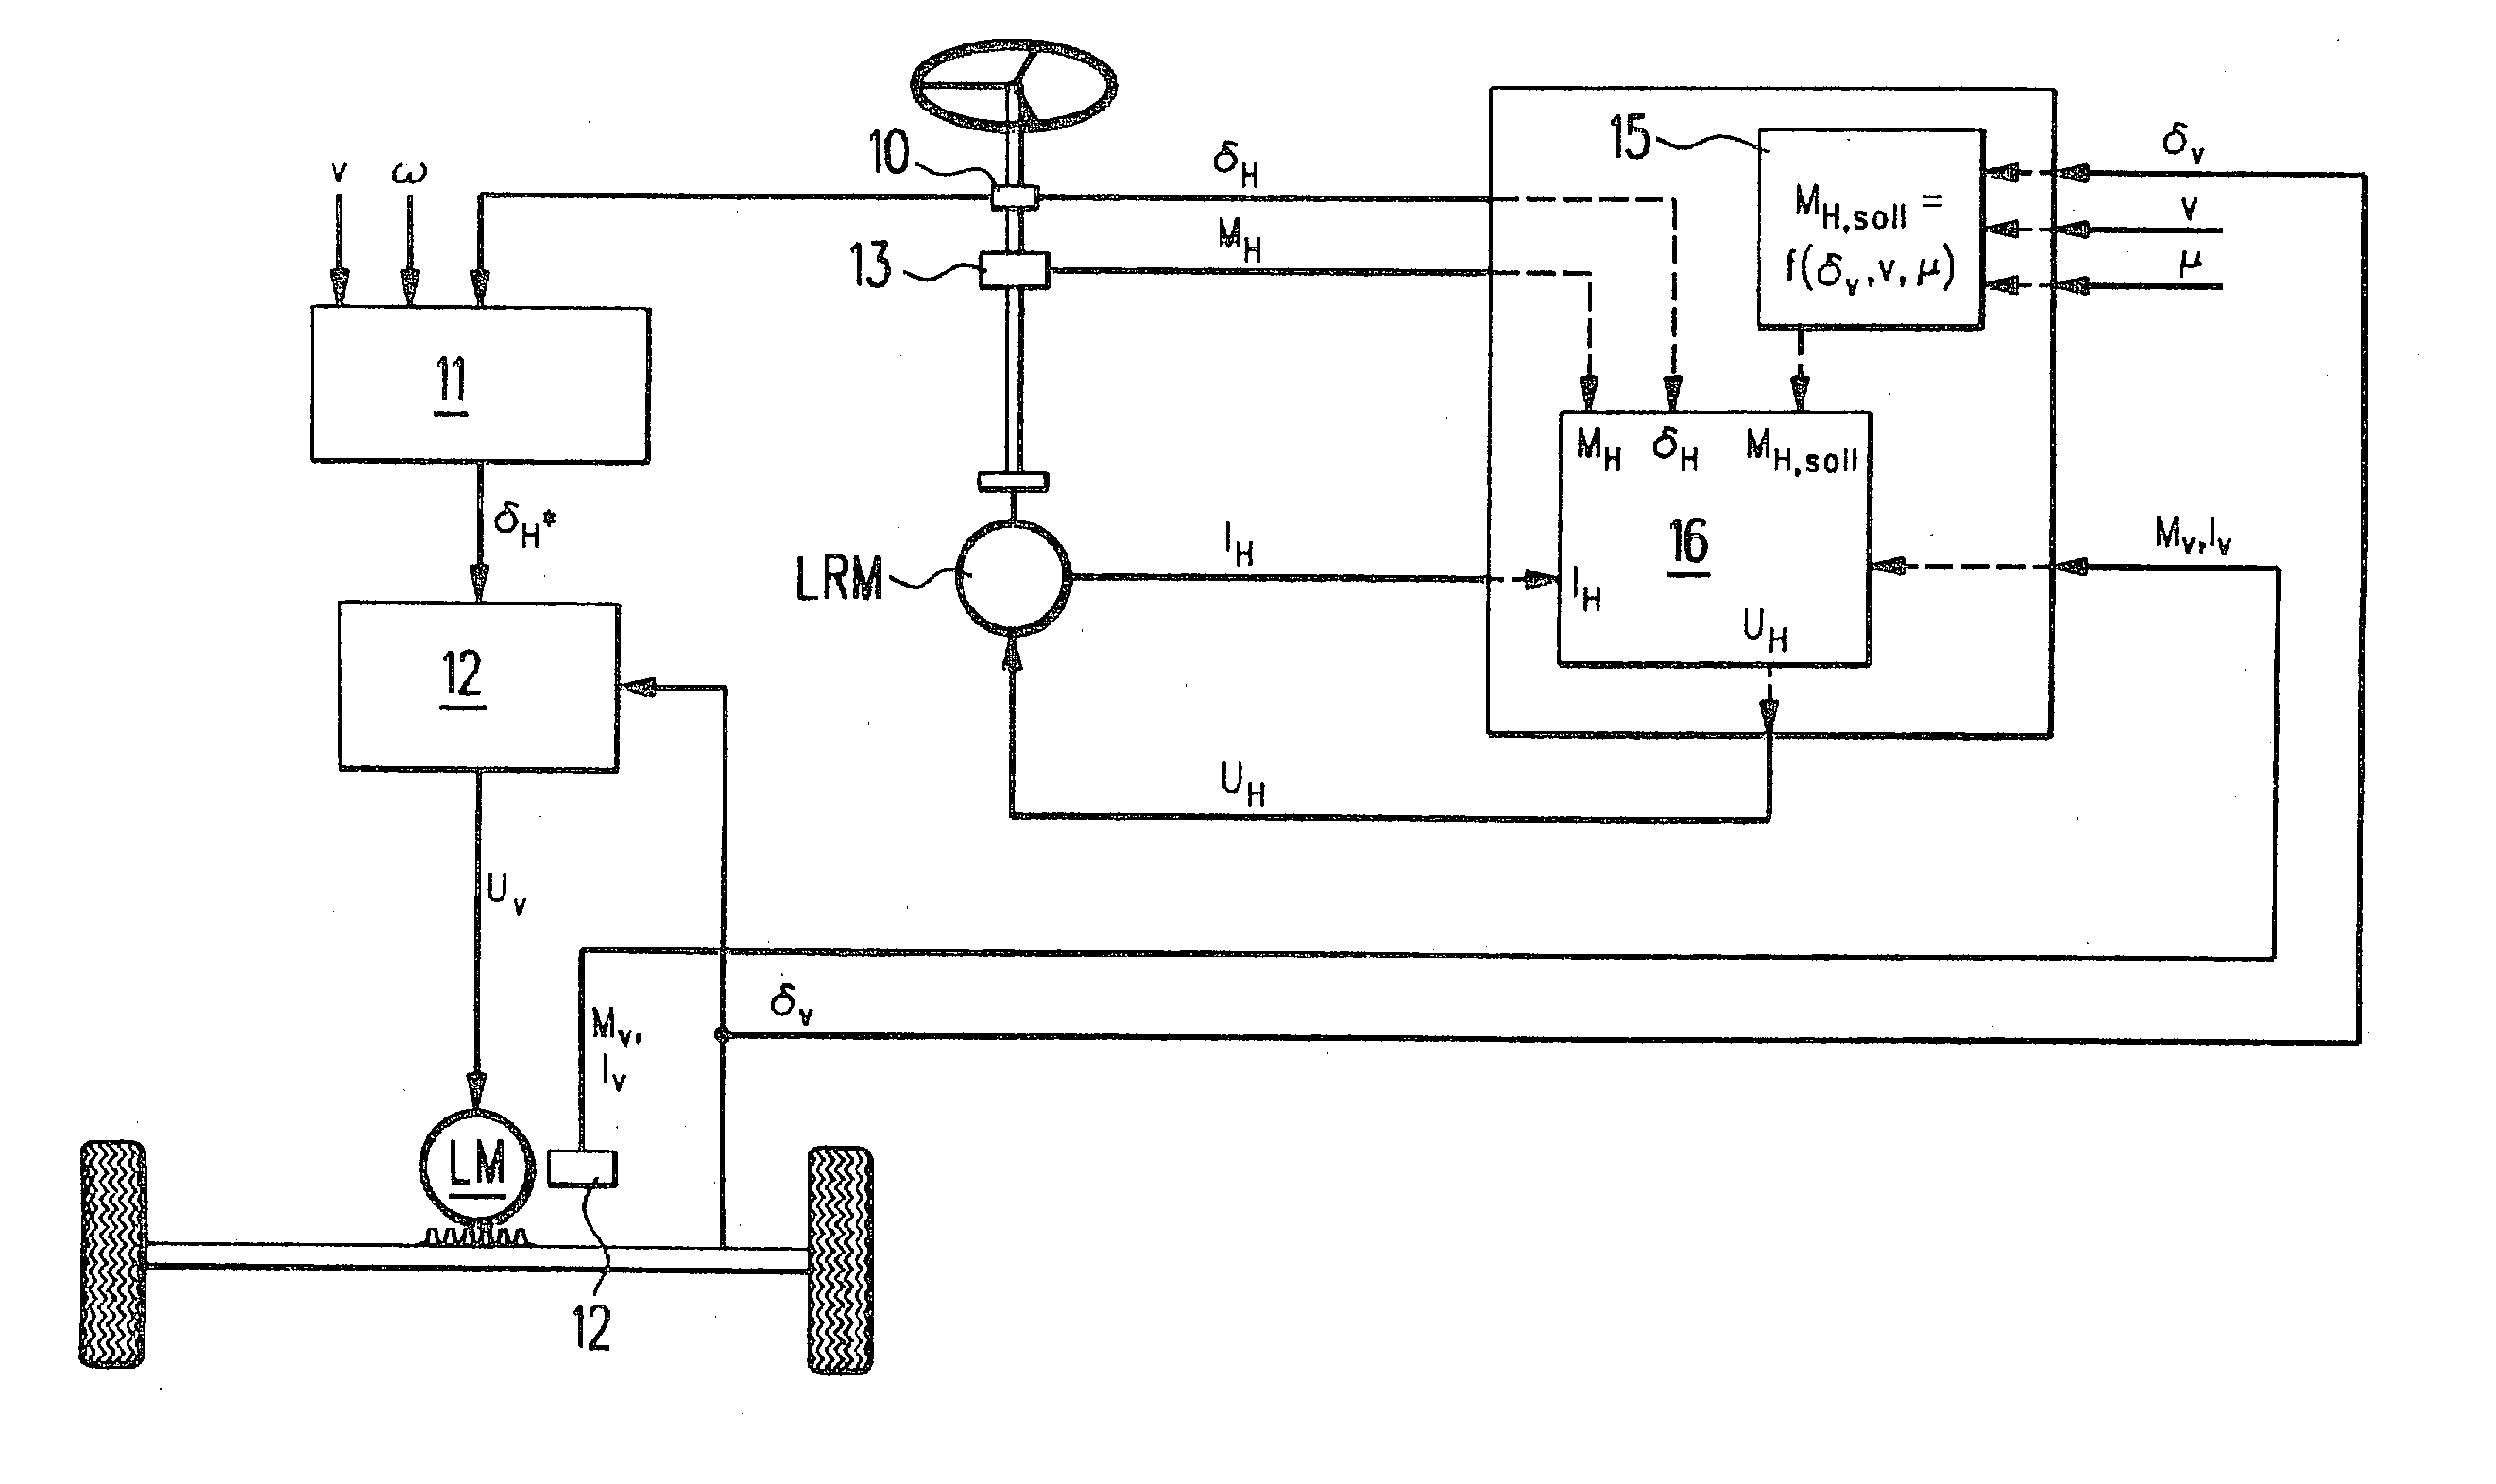 Method for controlling a steer-by-wire system